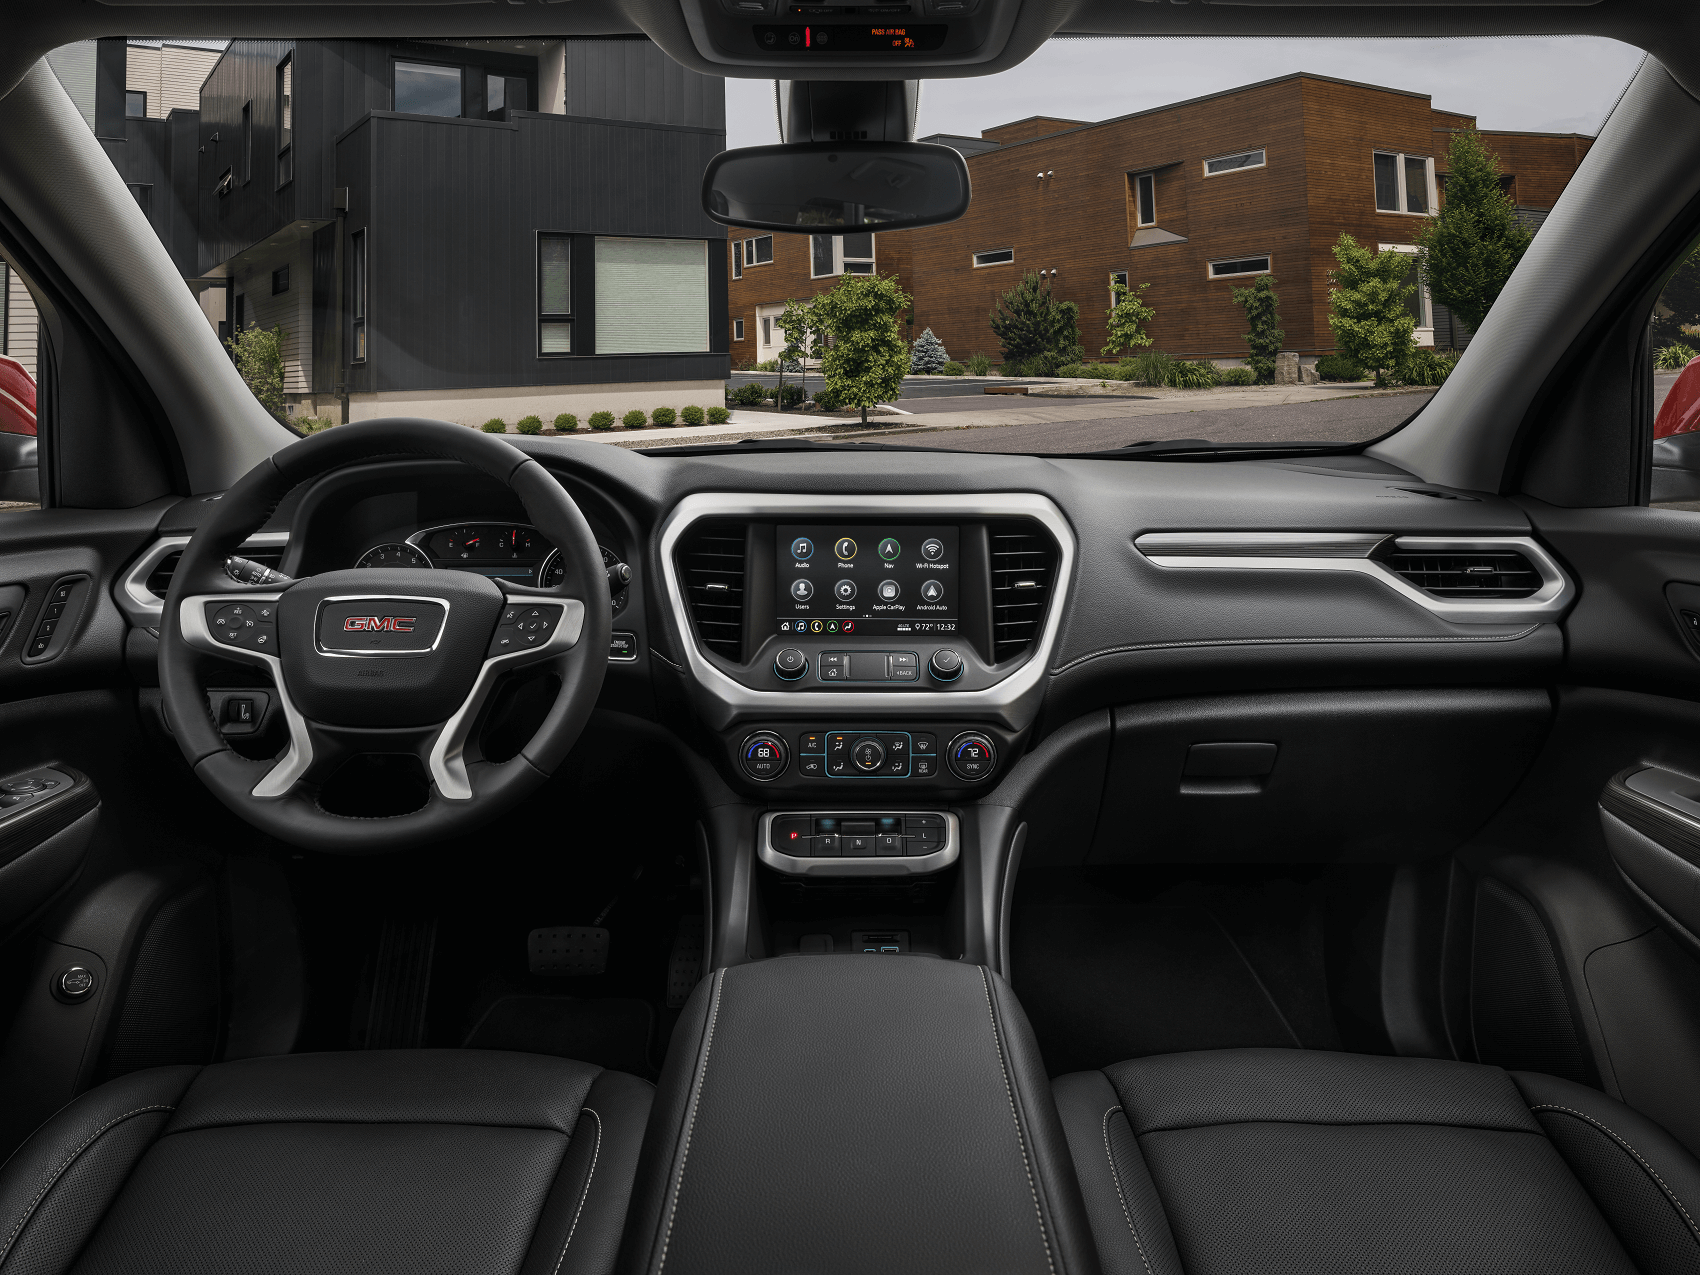 2021 GMC Acadia Review Fishers IN
